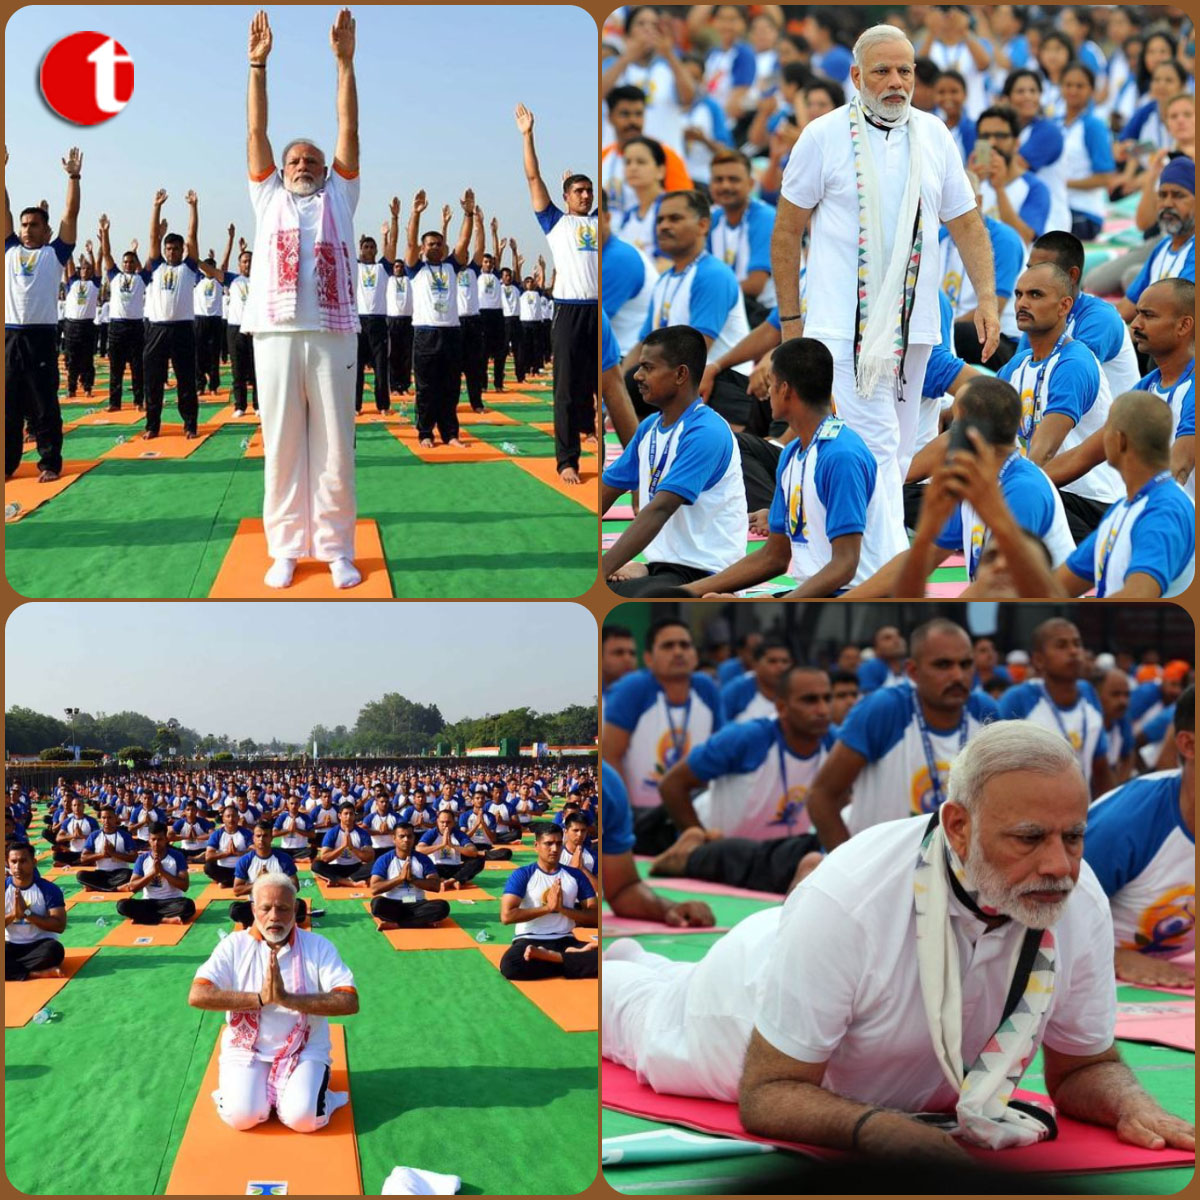 Yoga powerful unifying force in strife-torn world: PM Modi